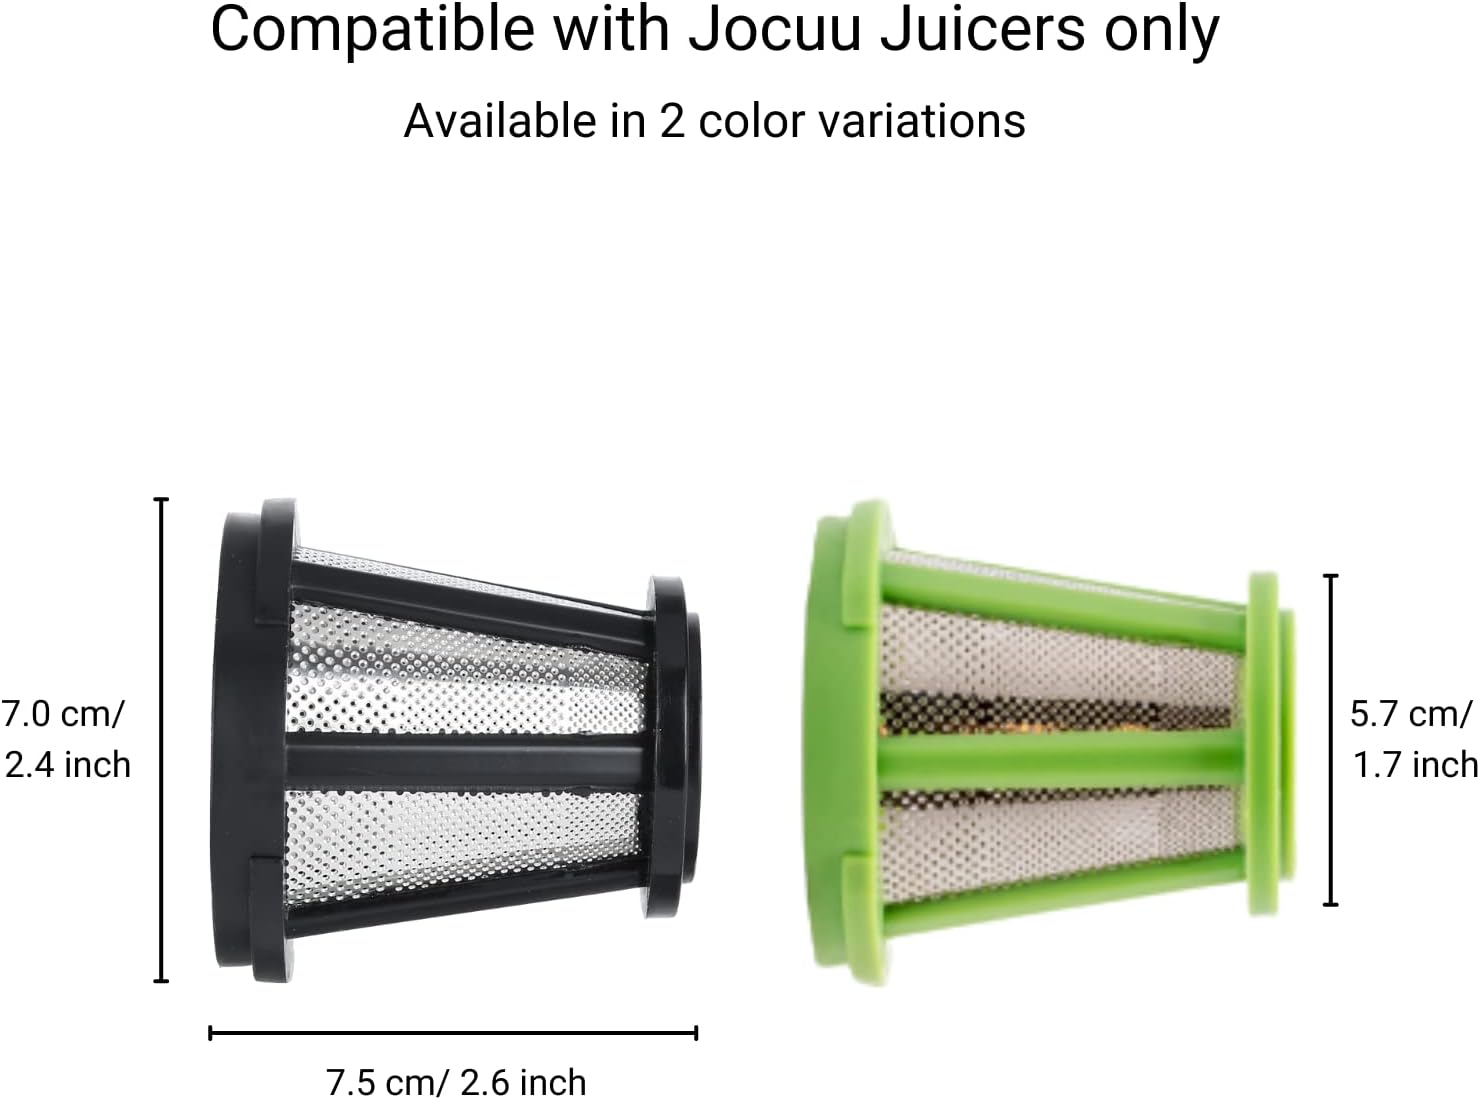 Generic Jocuu Accessory No. 7 Juicer Strainer, Filter, Replacement Part for Slow Masticating Juicer ZM1503, Easy to Assemble, Disassemb